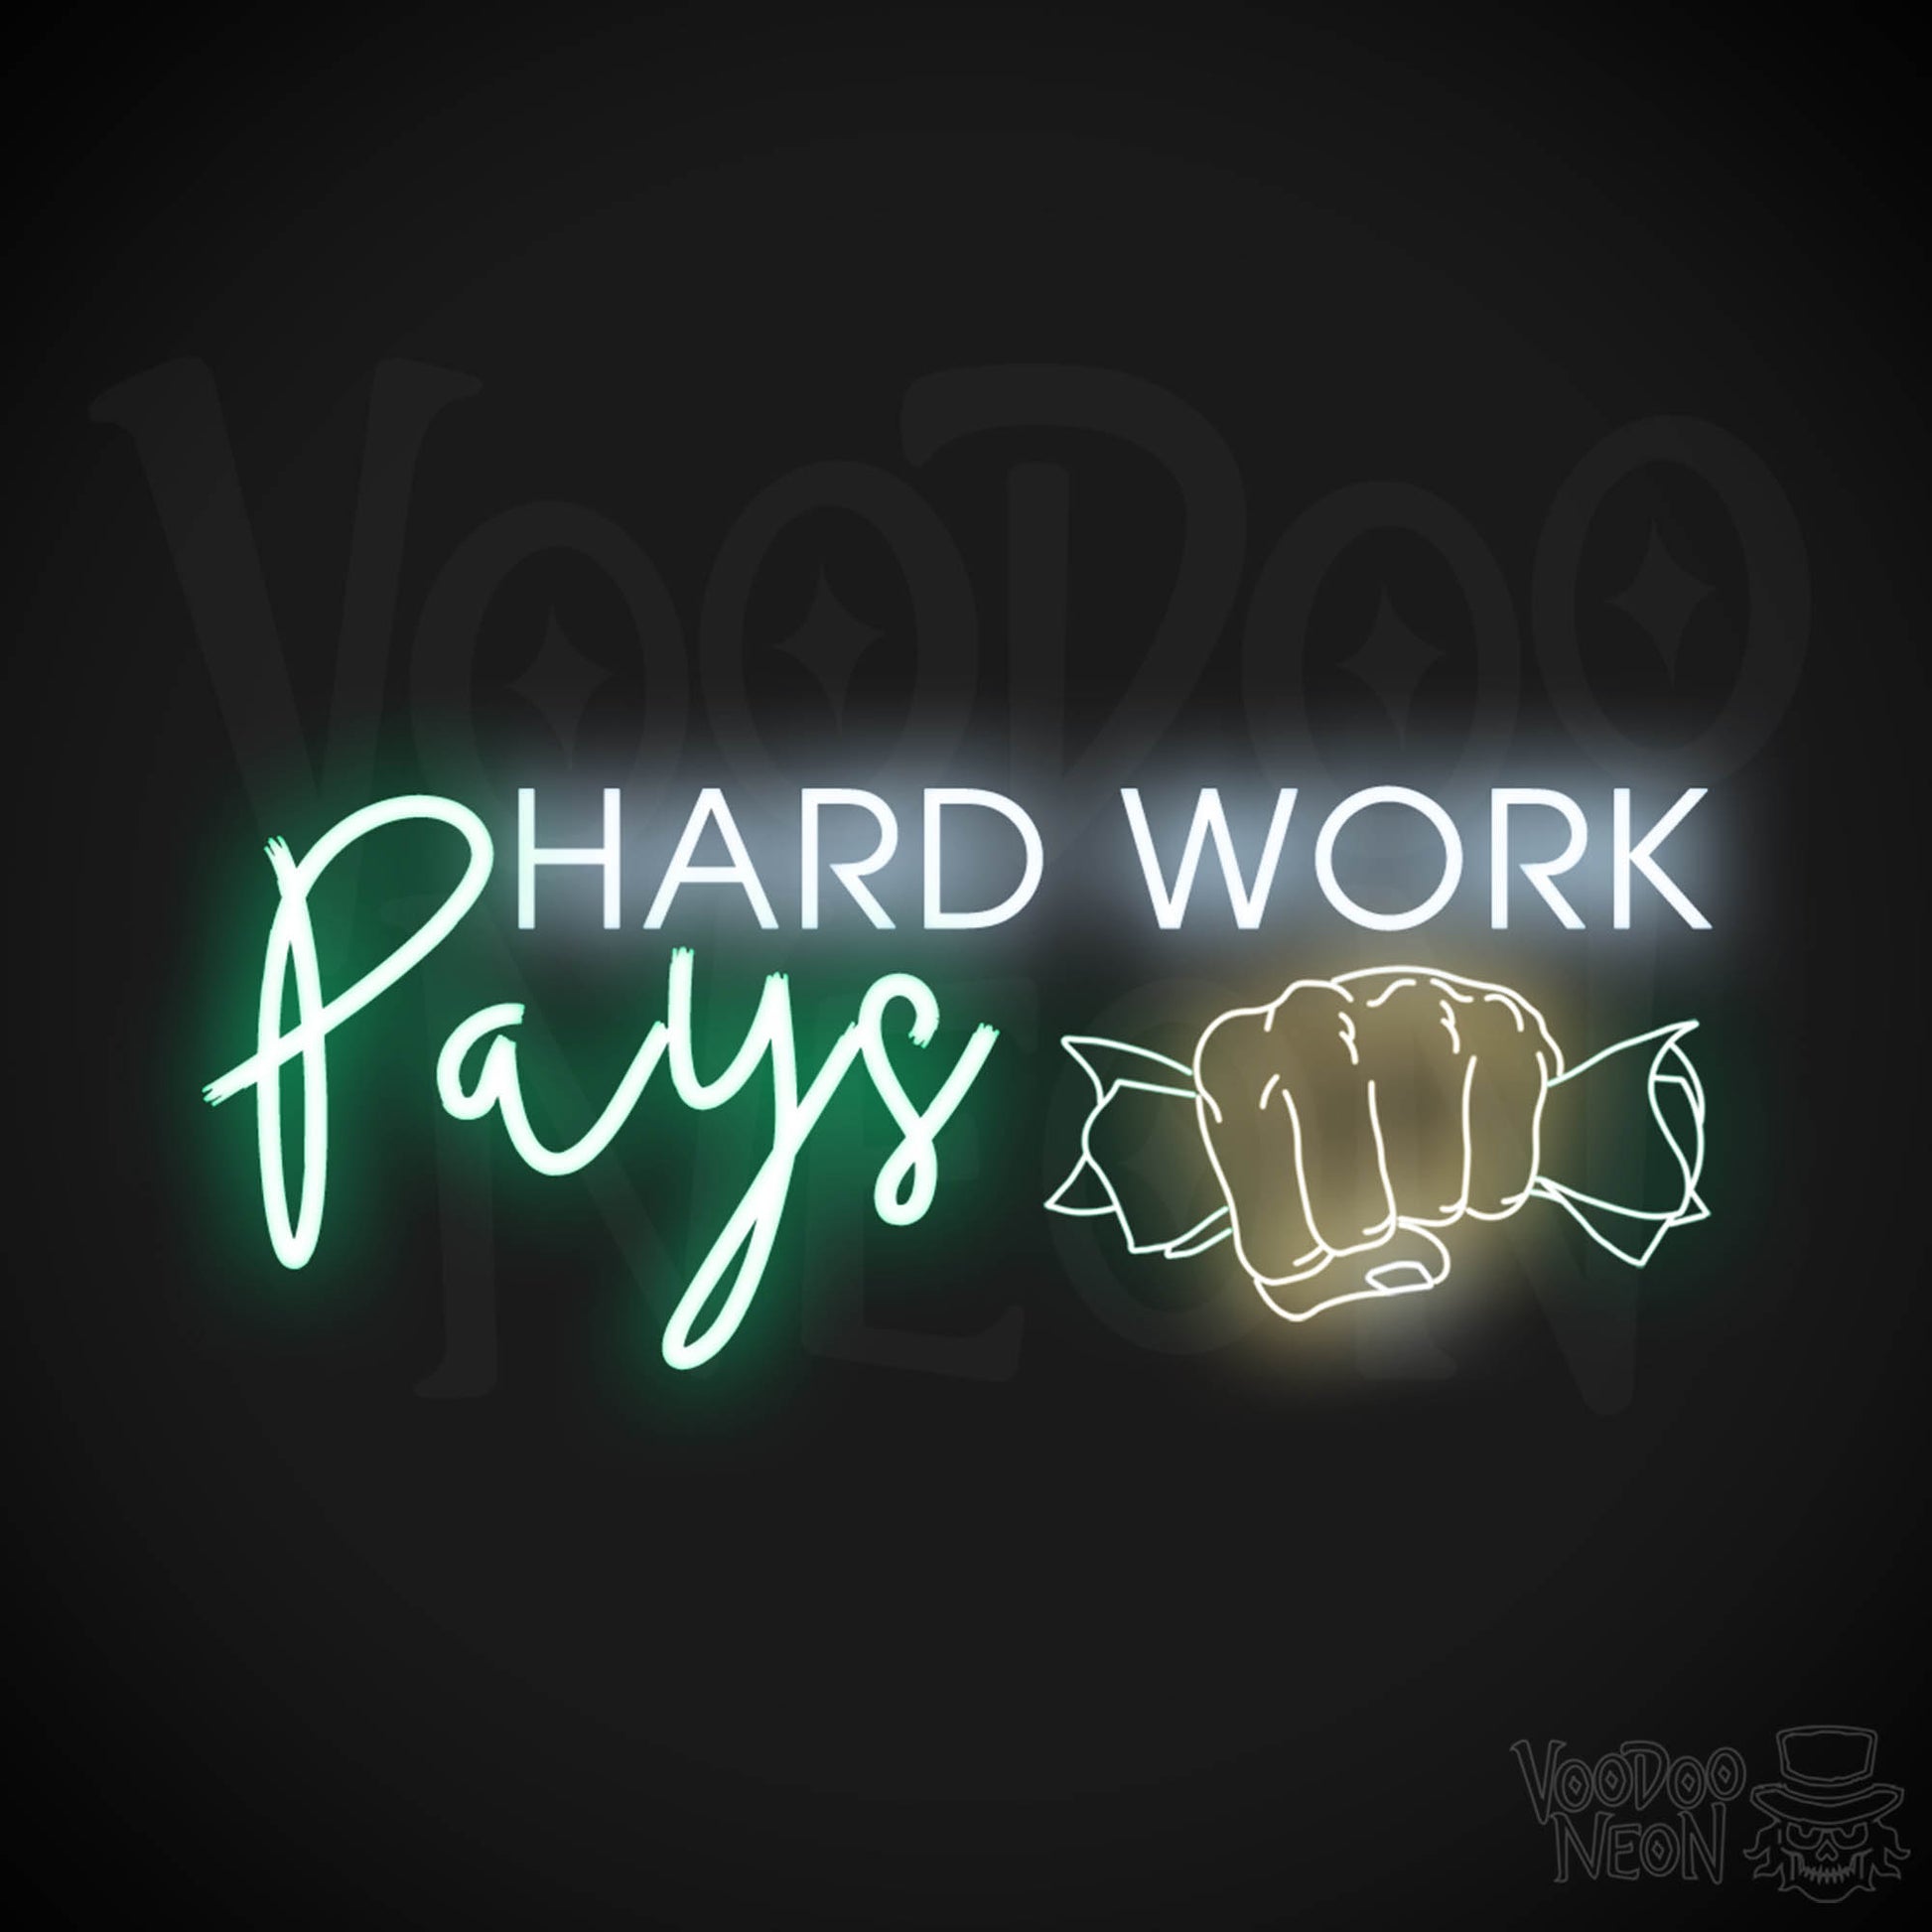 Hard Work Pays Neon Sign - LED Neon Wall Art - Color Multi-Color